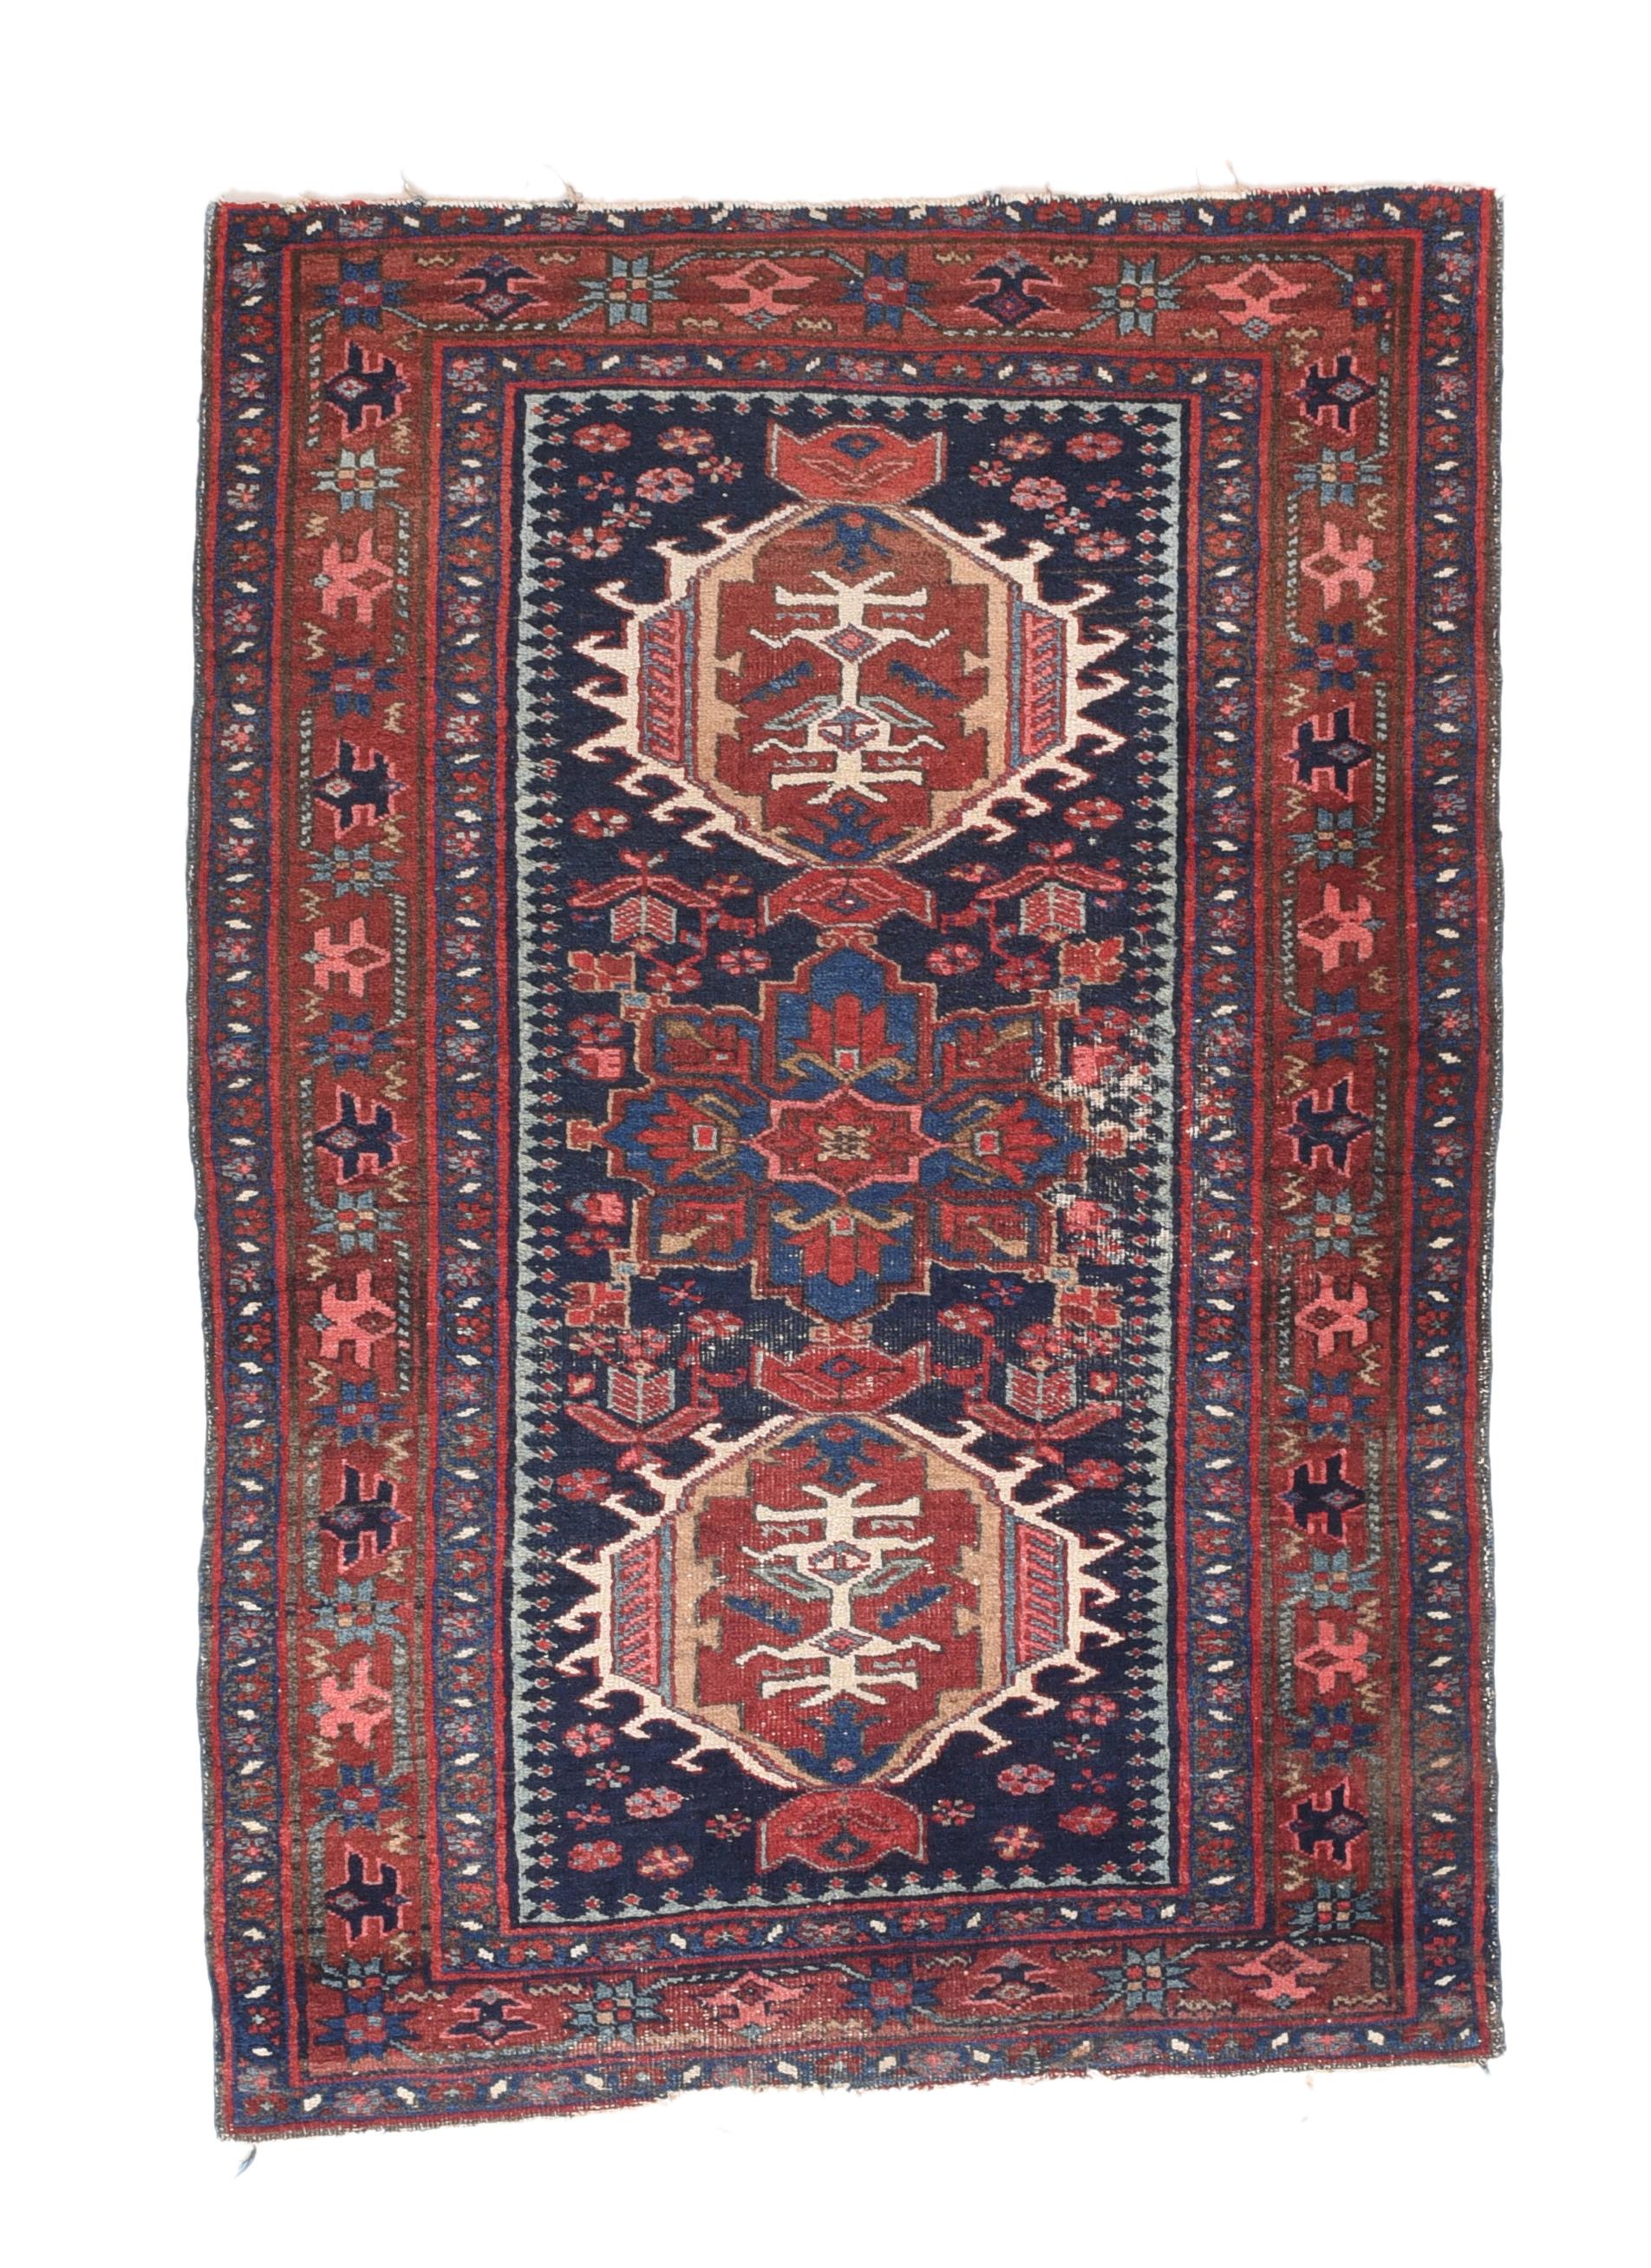 Hand-Knotted Fine Antique Karajeh Heriz Persian Rug, Hand Knotted, circa 1910